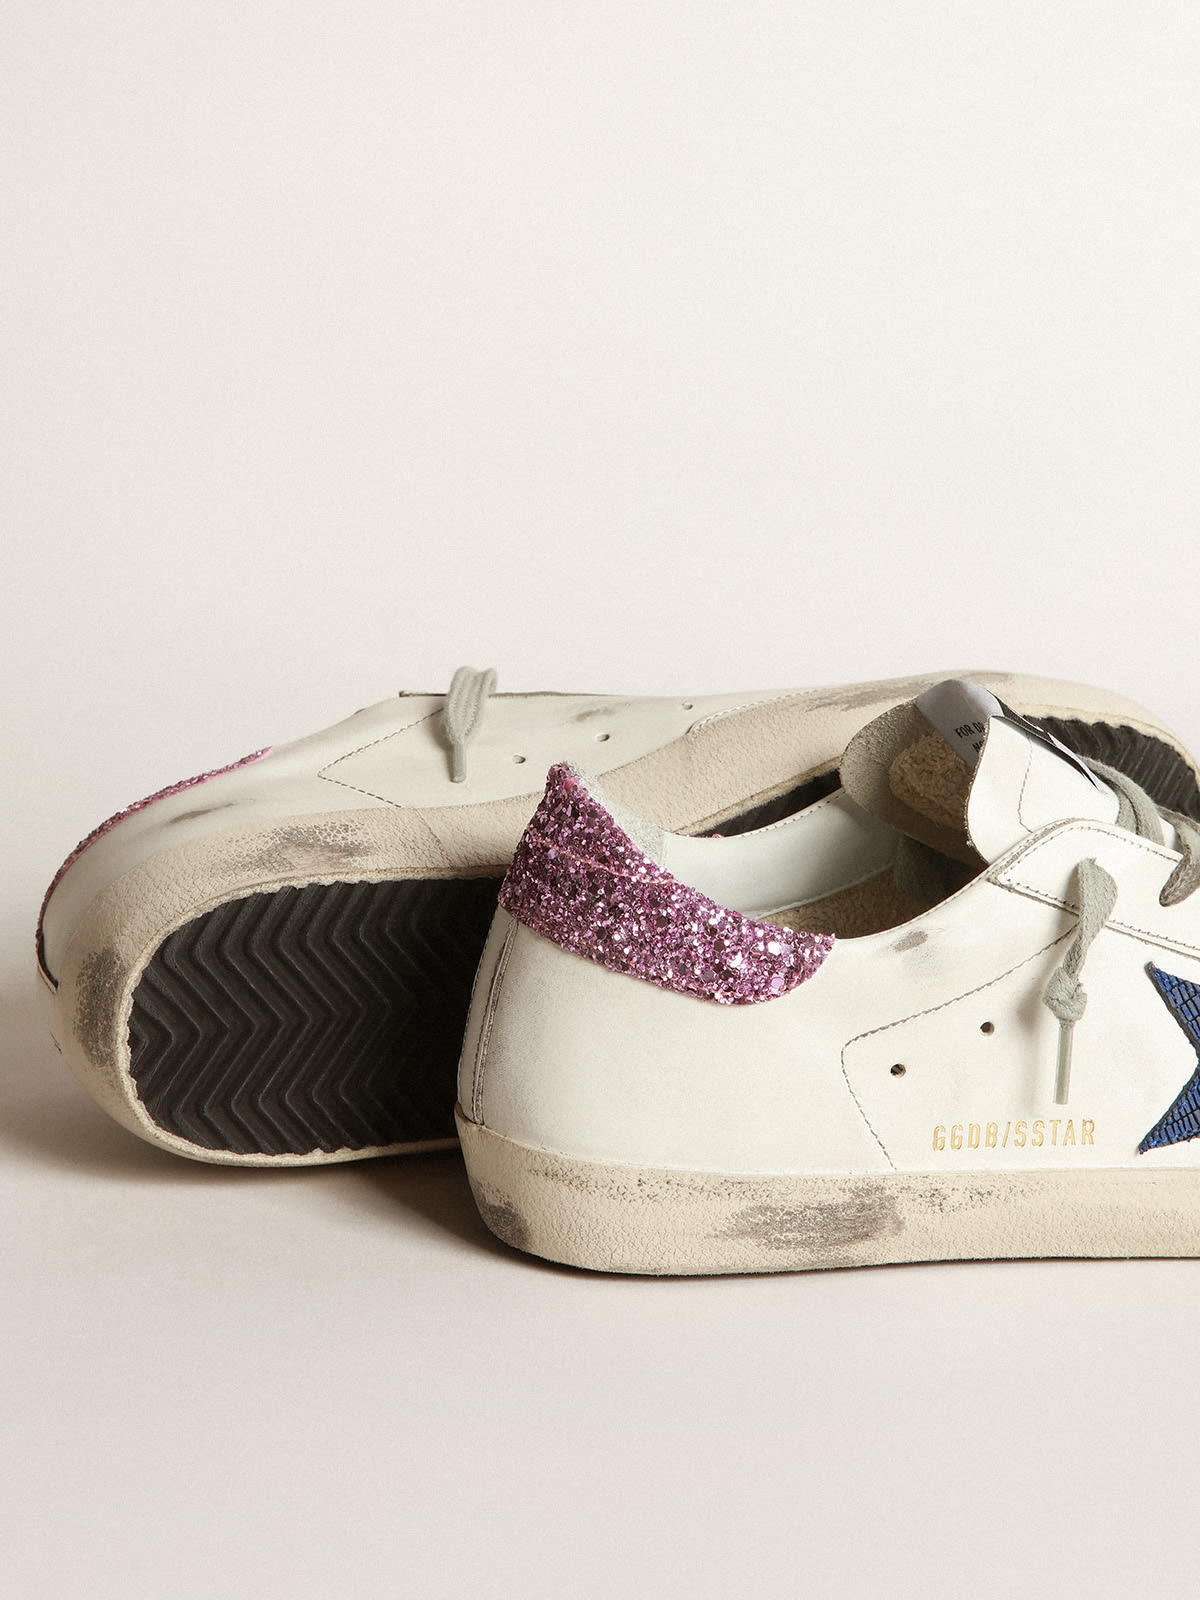 Golden Goose - White Super-Star sneakers with blue star and glittery heel tab in 